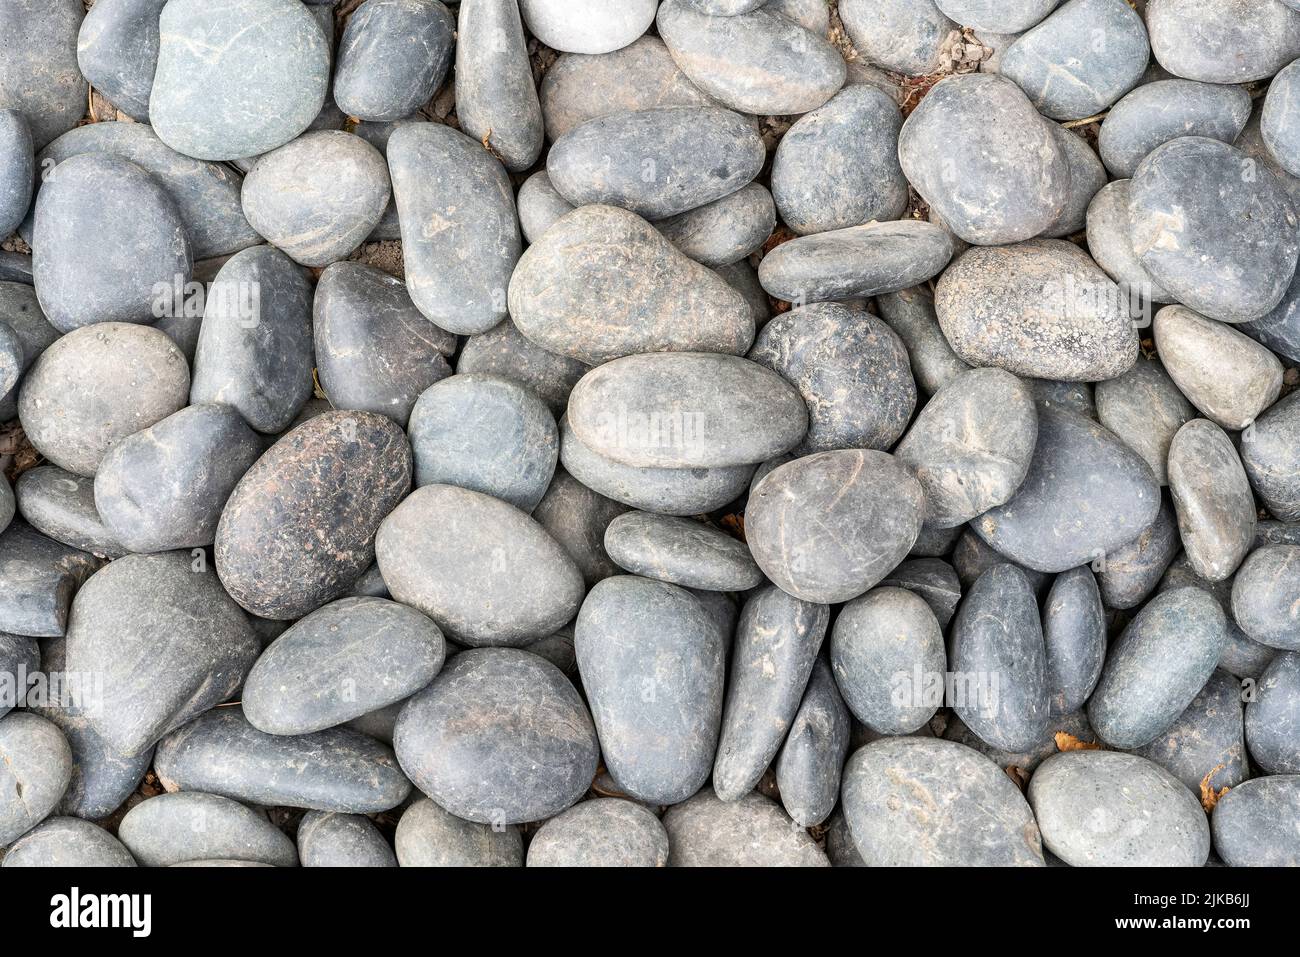 Abstract sea or river pebbles background with a smooth texture, stock phot image Stock Photo